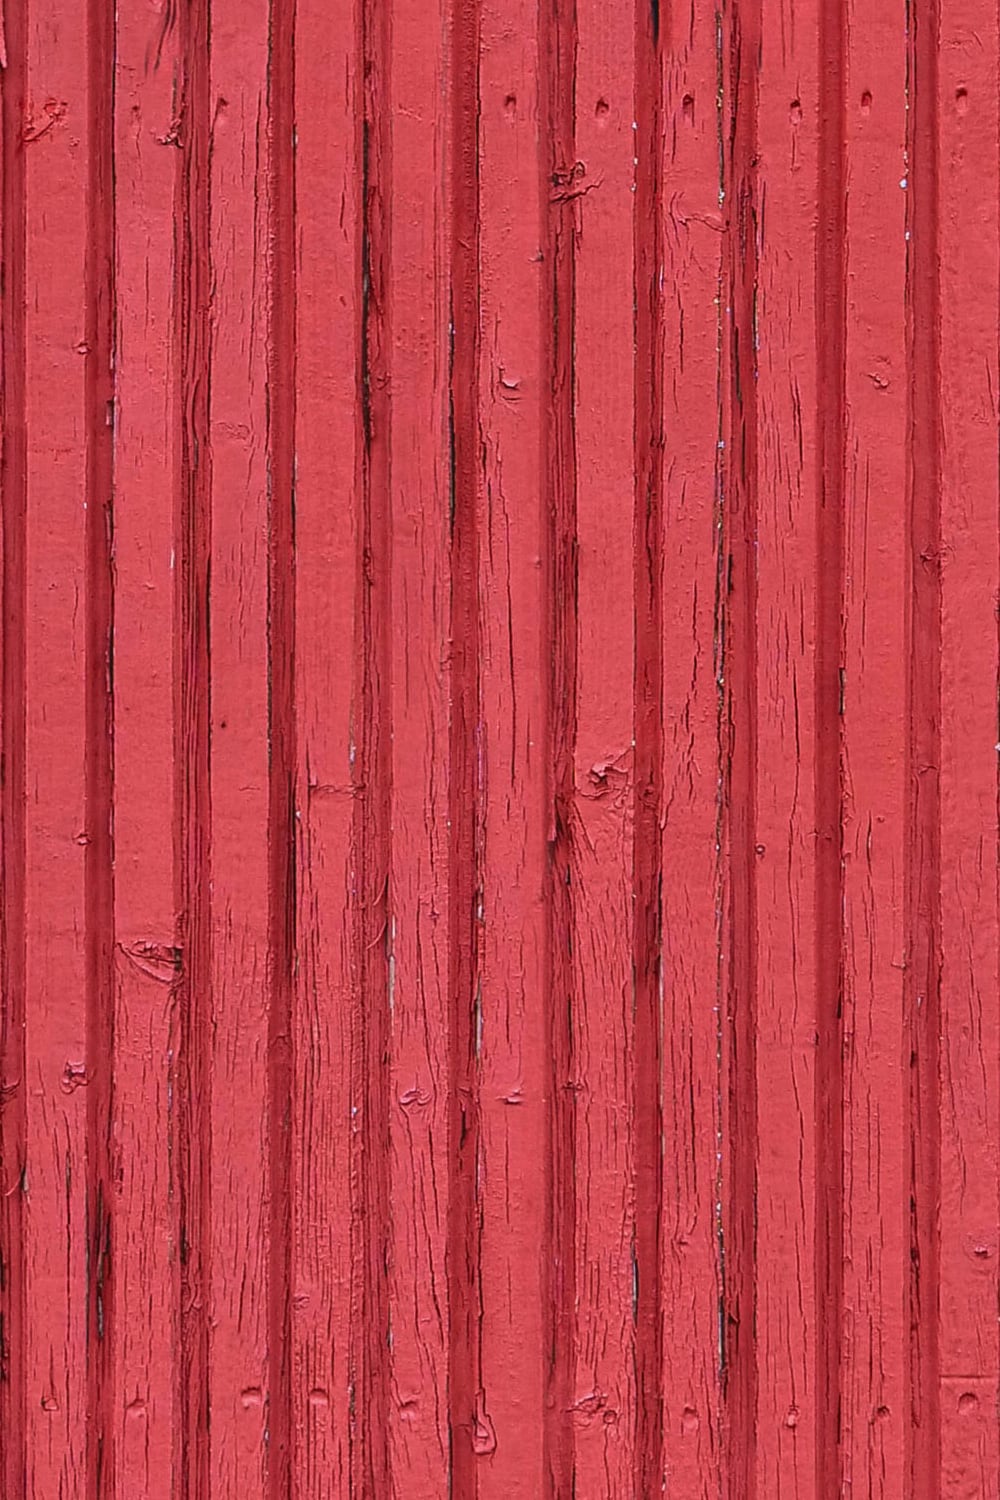 exterior wood paneling with red flaking paint - close up